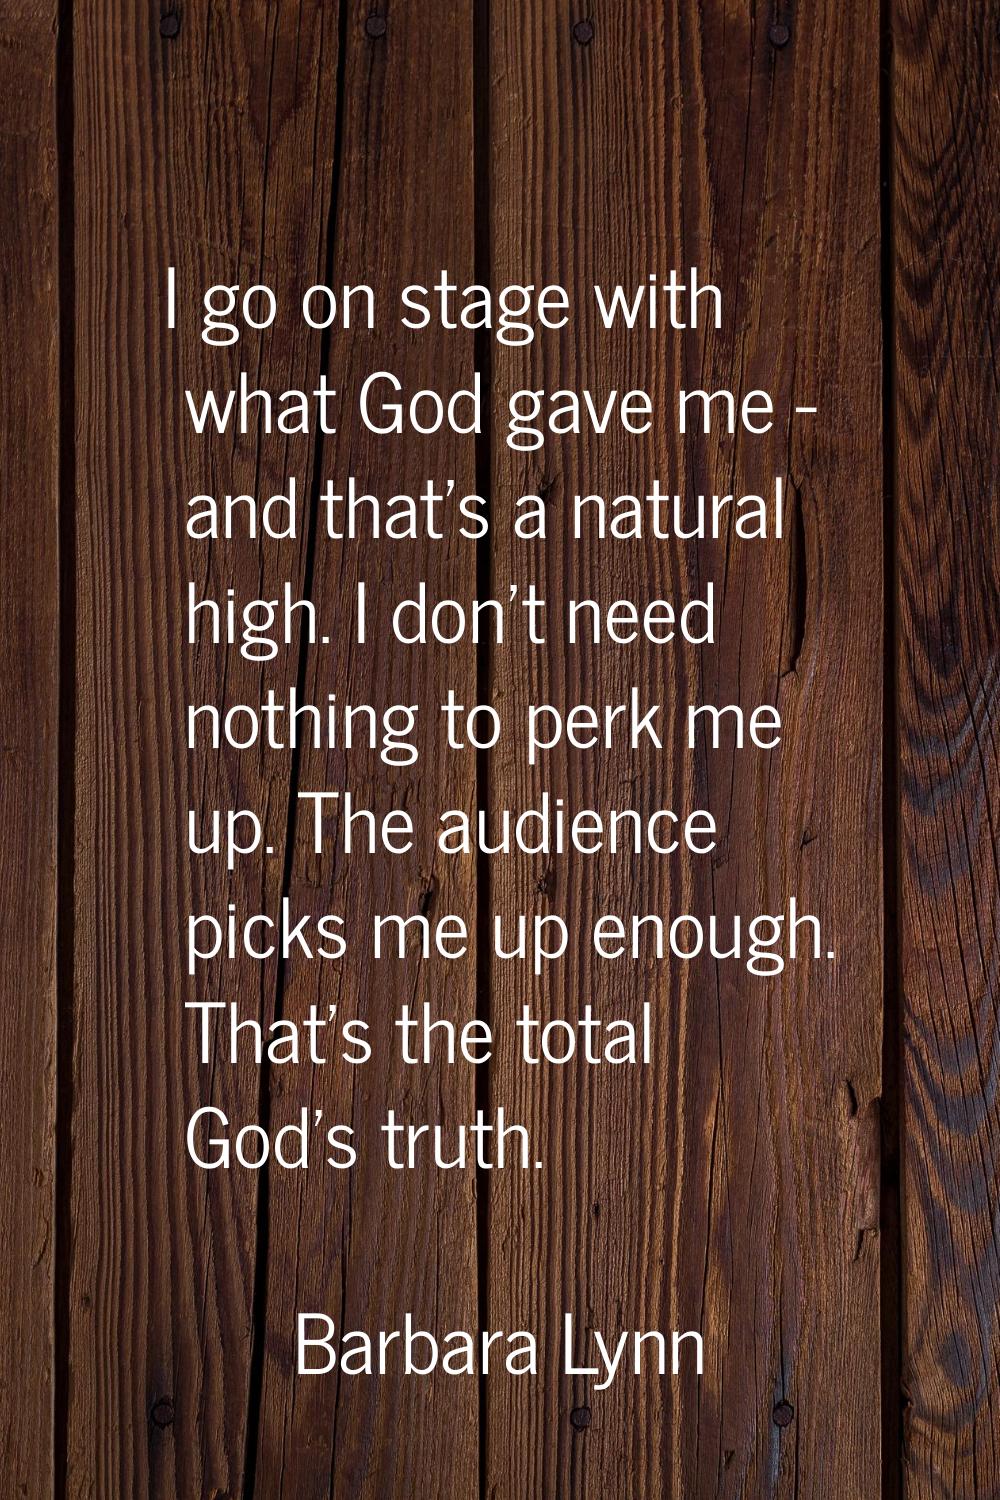 I go on stage with what God gave me - and that's a natural high. I don't need nothing to perk me up